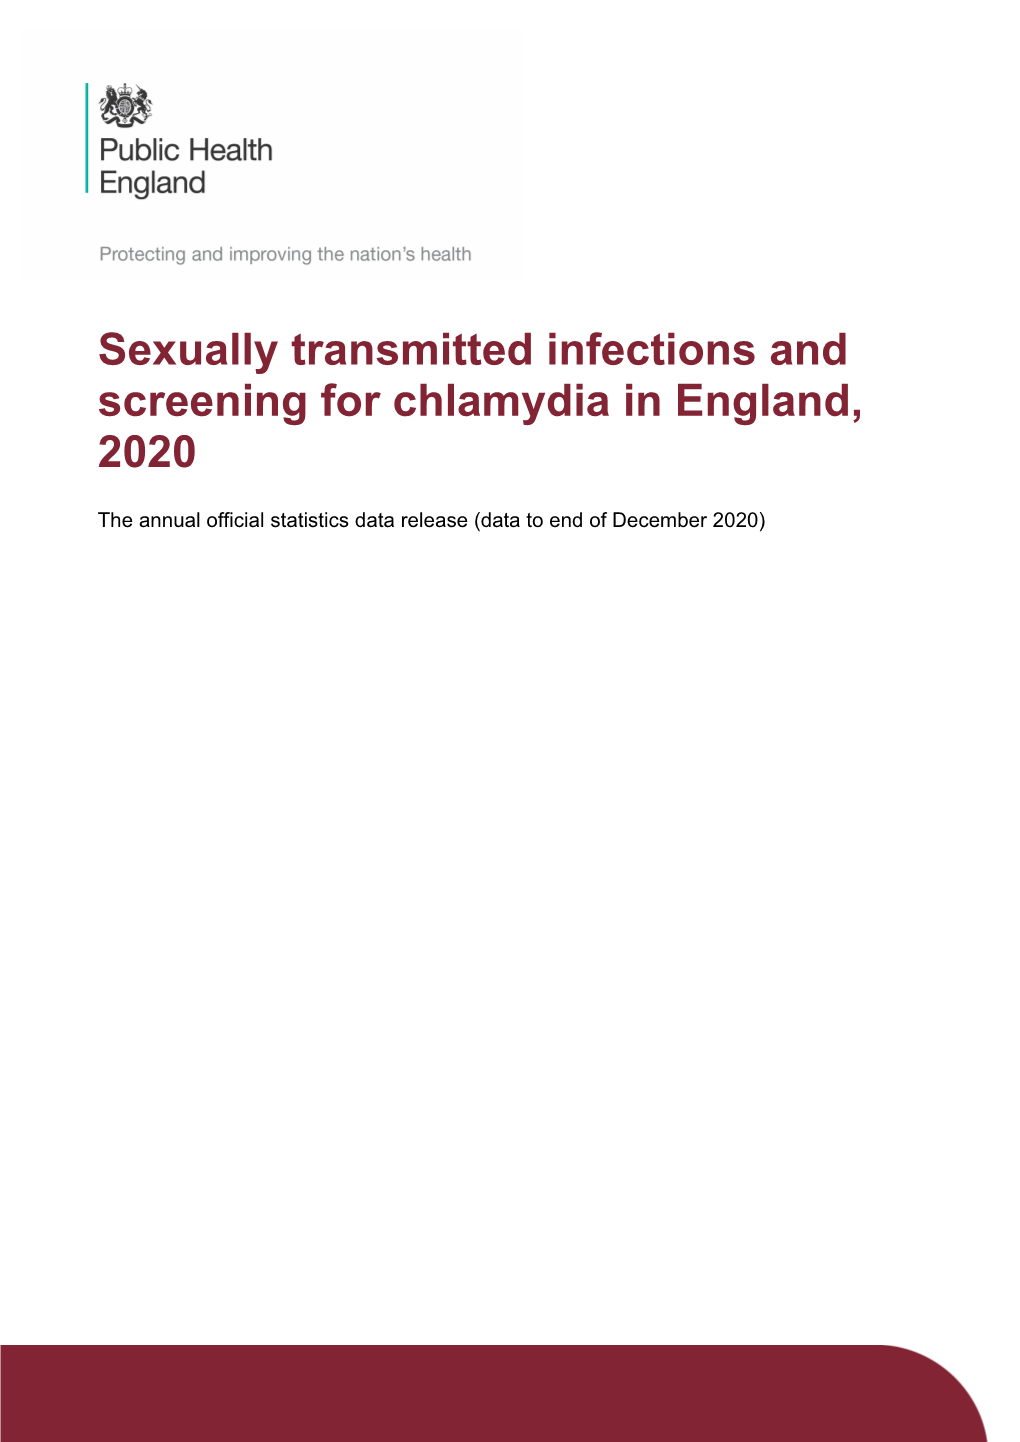 Sexually Transmitted Infections and Screening for Chlamydia in England, 2020